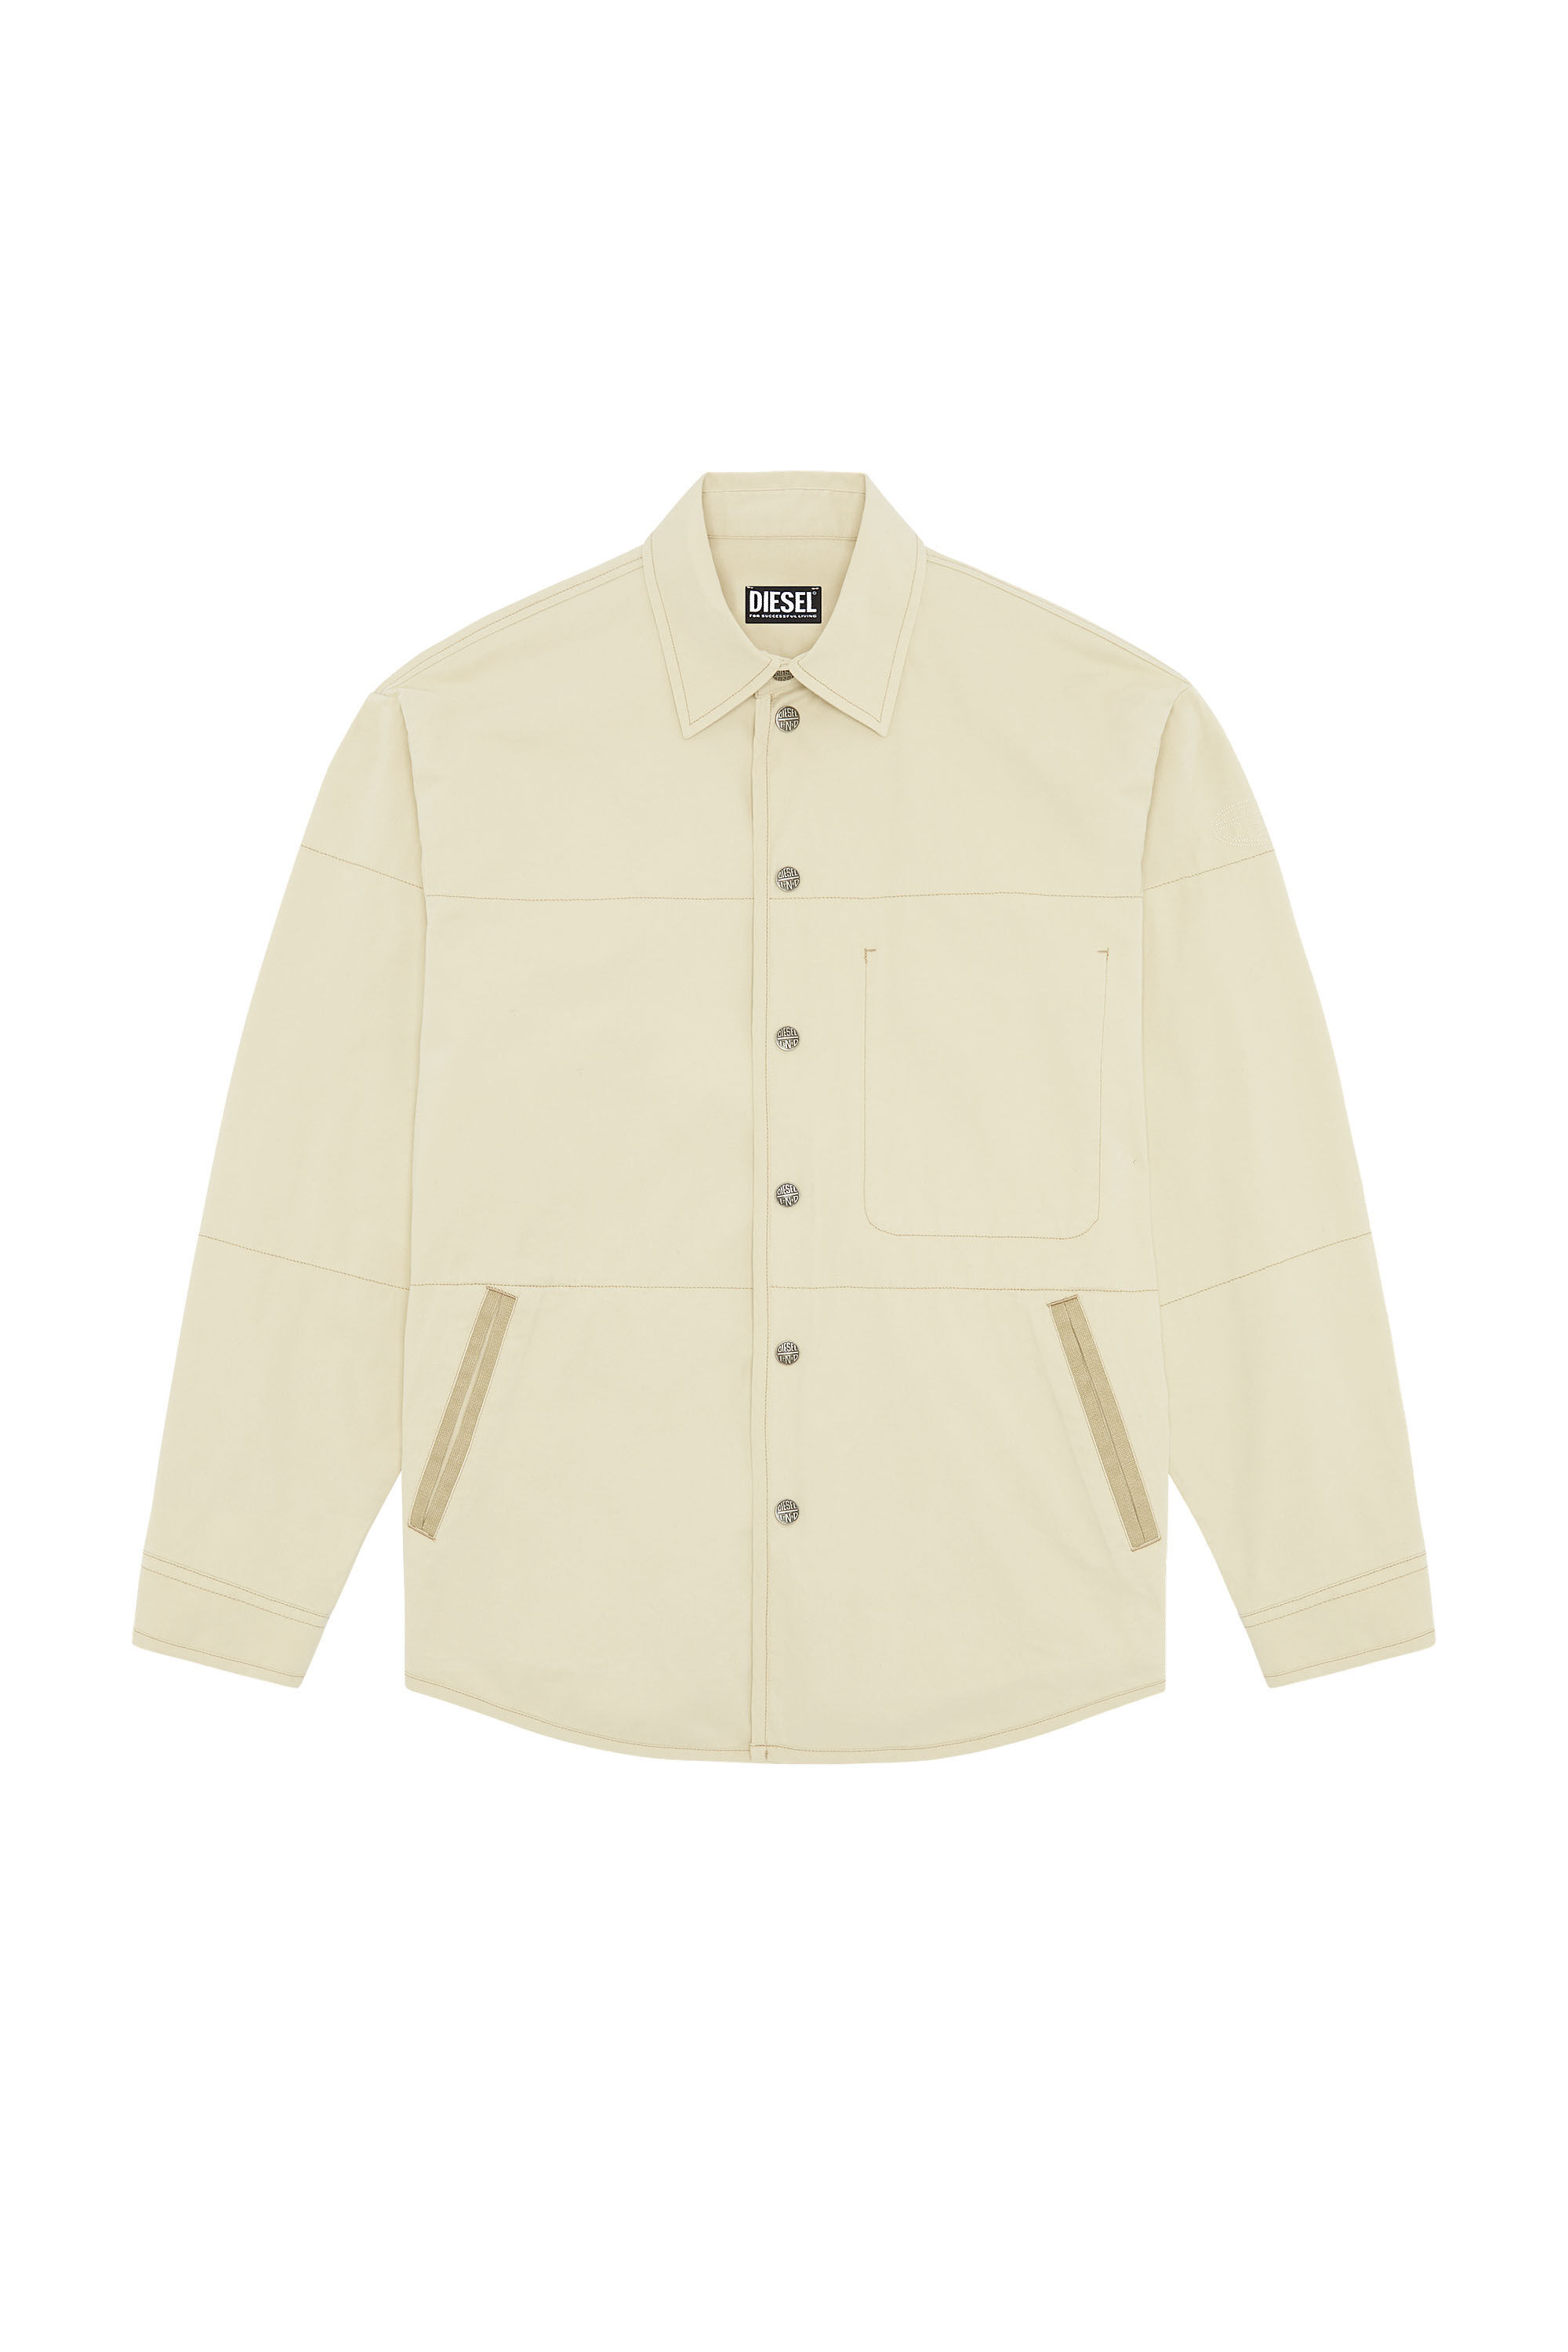 S-DOVES Man: Shirt jacket in peached twill | Diesel